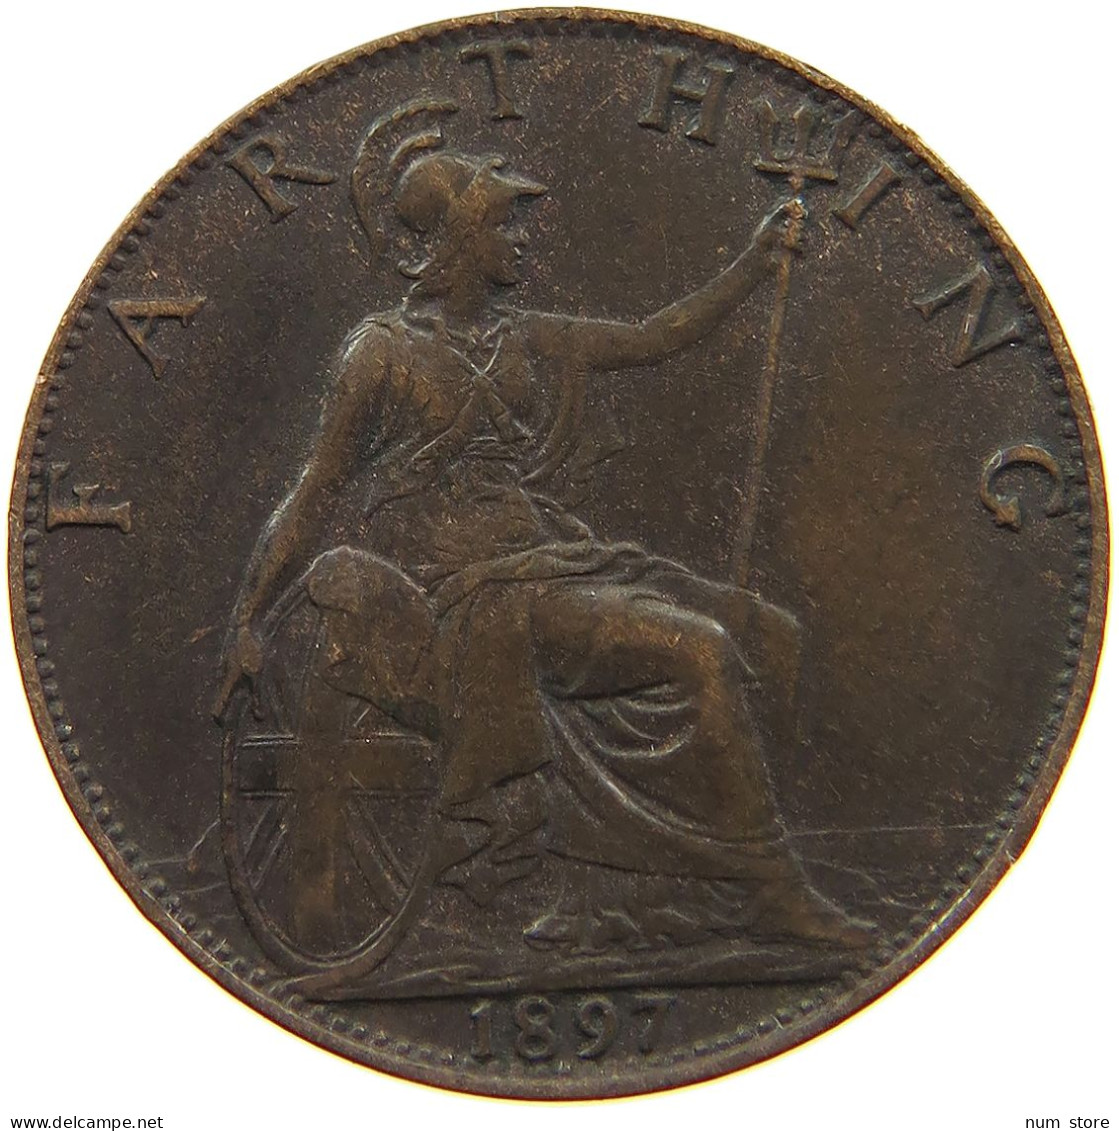 GREAT BRITAIN FARTHING 1897 Victoria 1837-1901 #a011 0915 - B. 1 Farthing